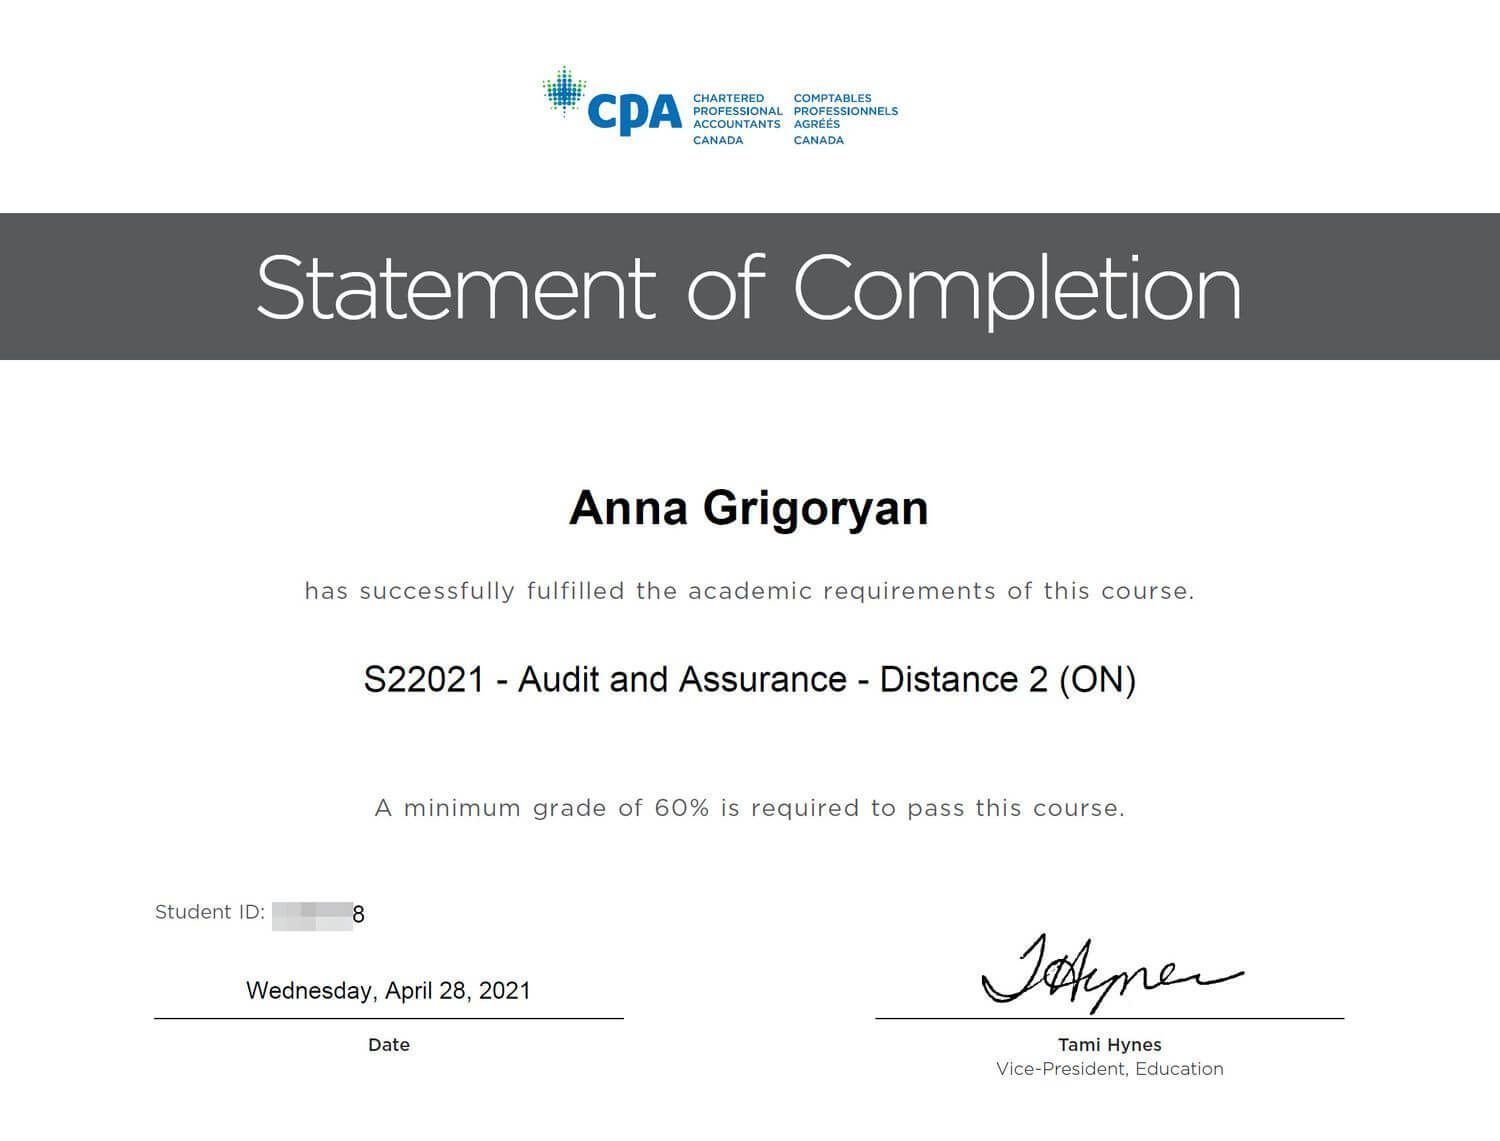 Small business accountant Anna Grigoryan's CPA certificate - Audit and Assurance